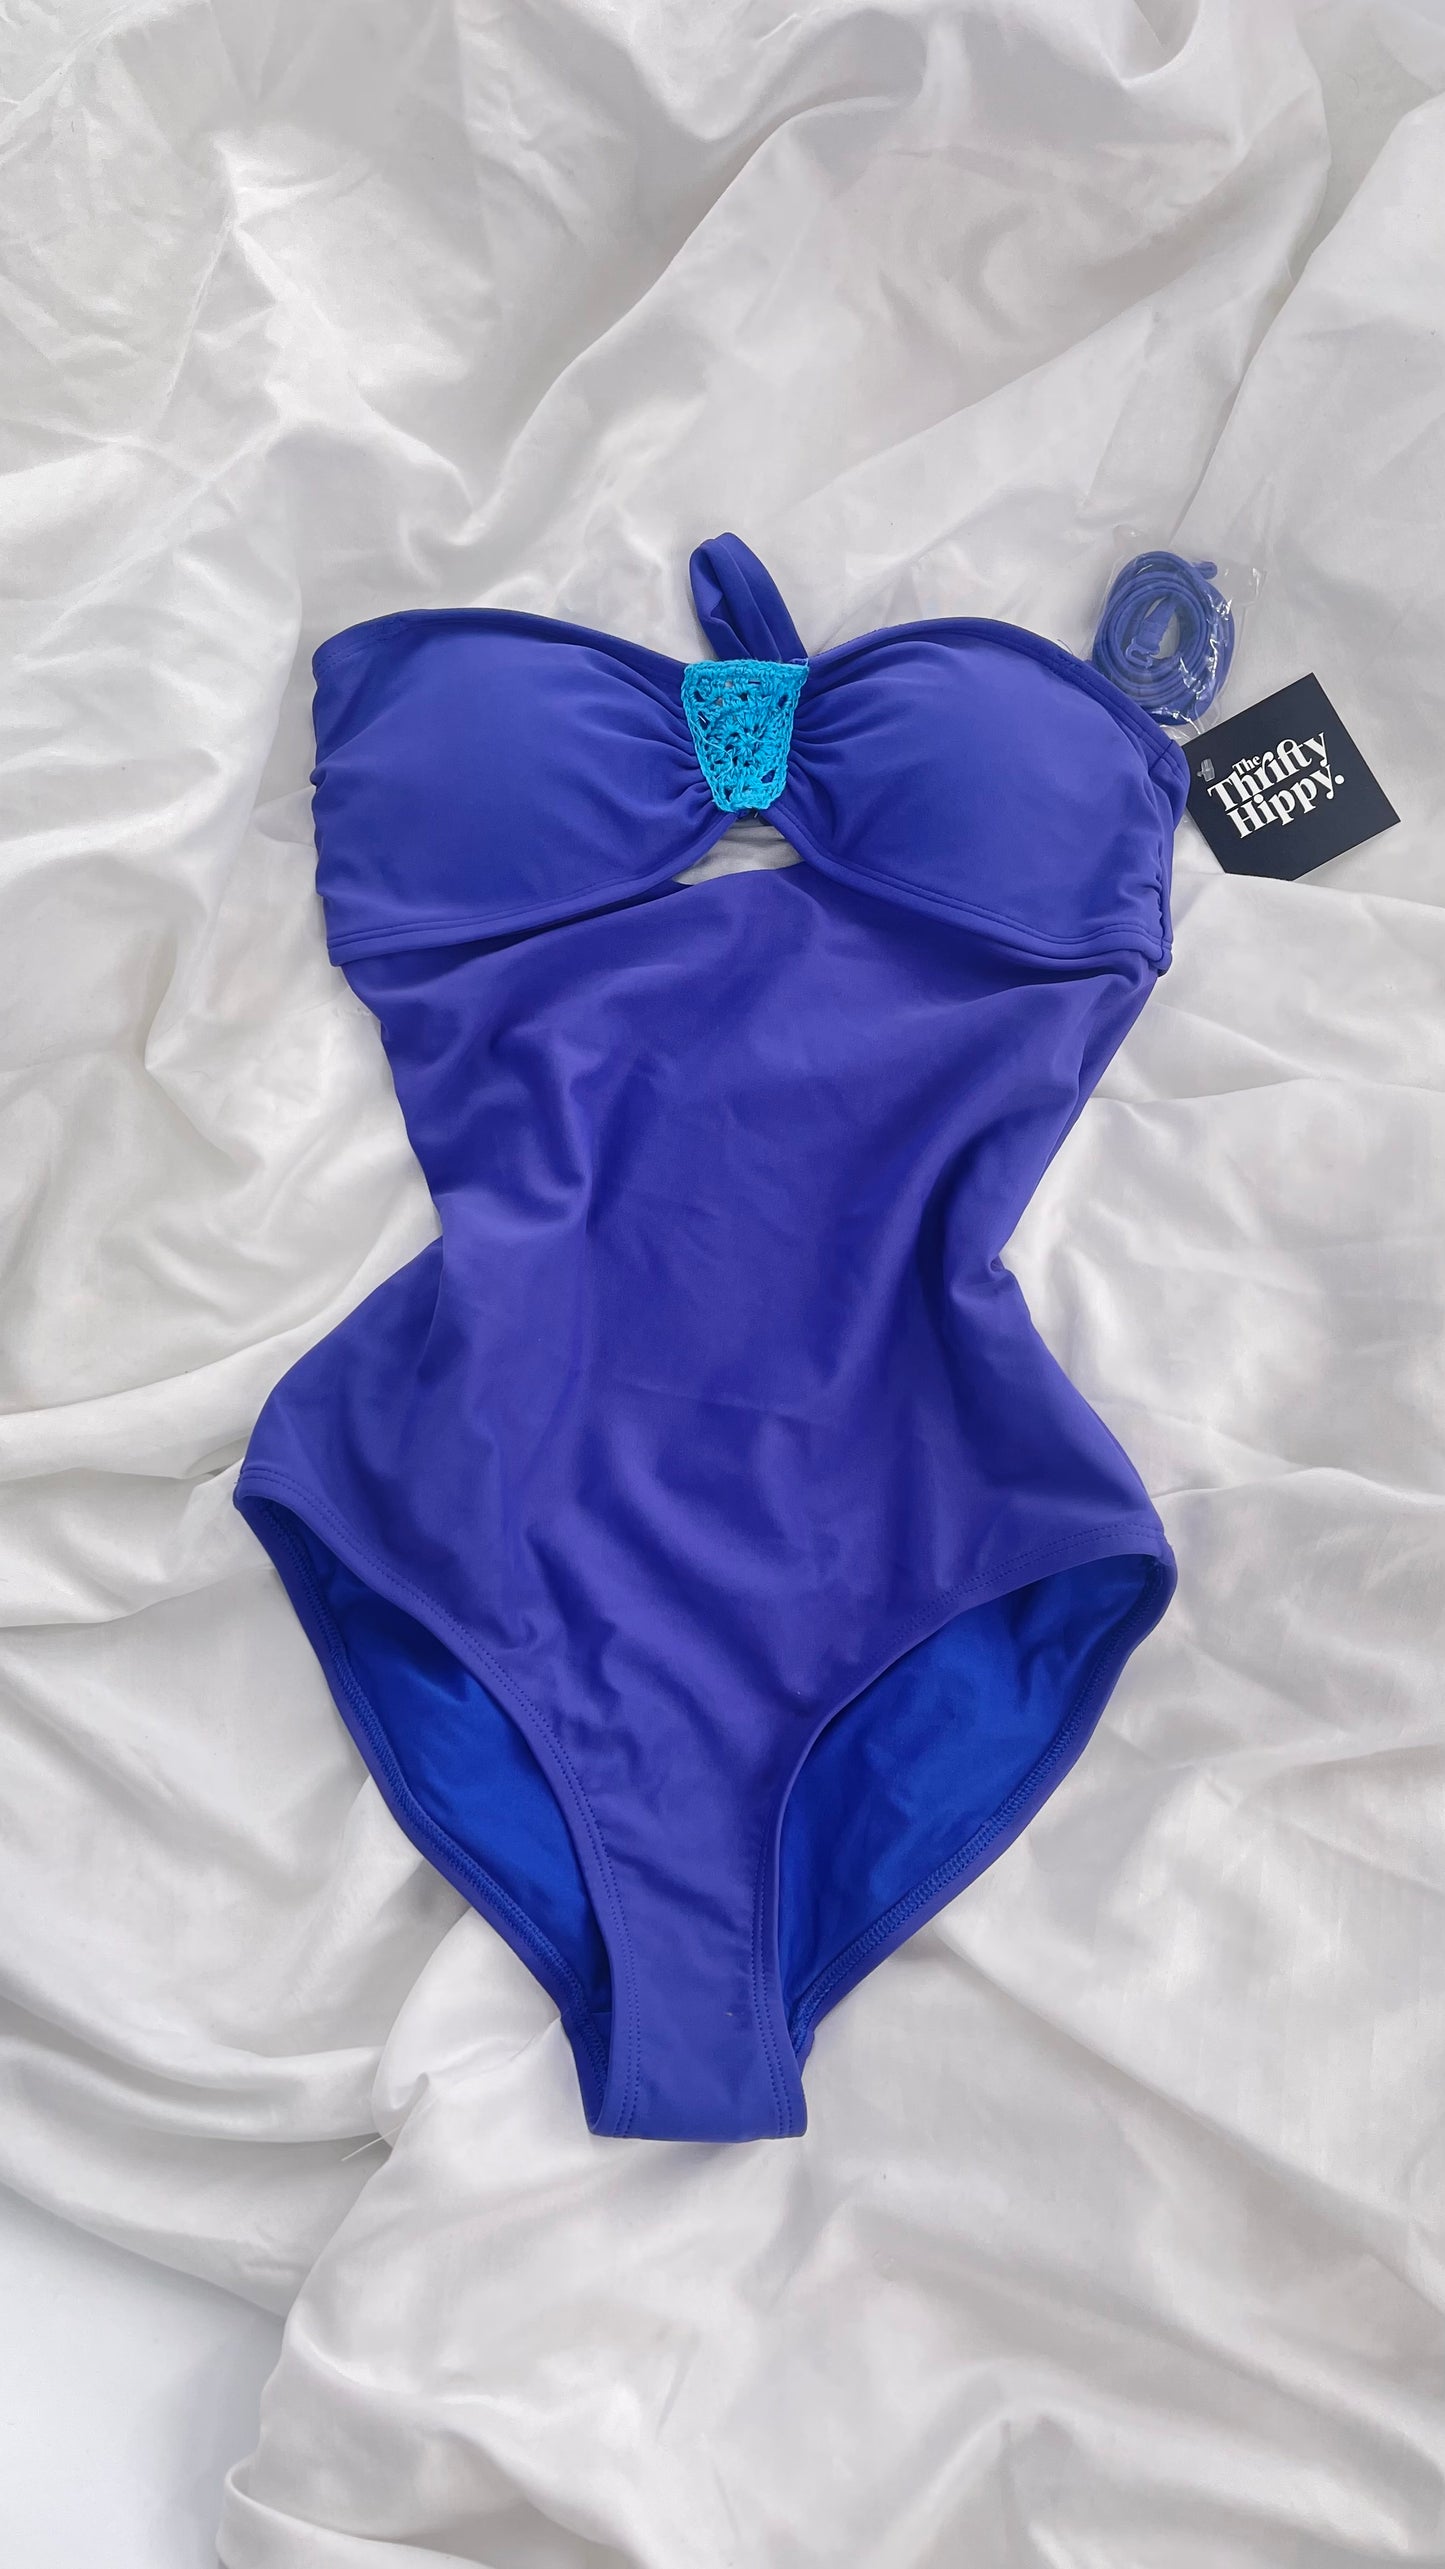 Aerie Purple/Blue One Piece Swimsuit with Crochet Bust and Open Back (Small)